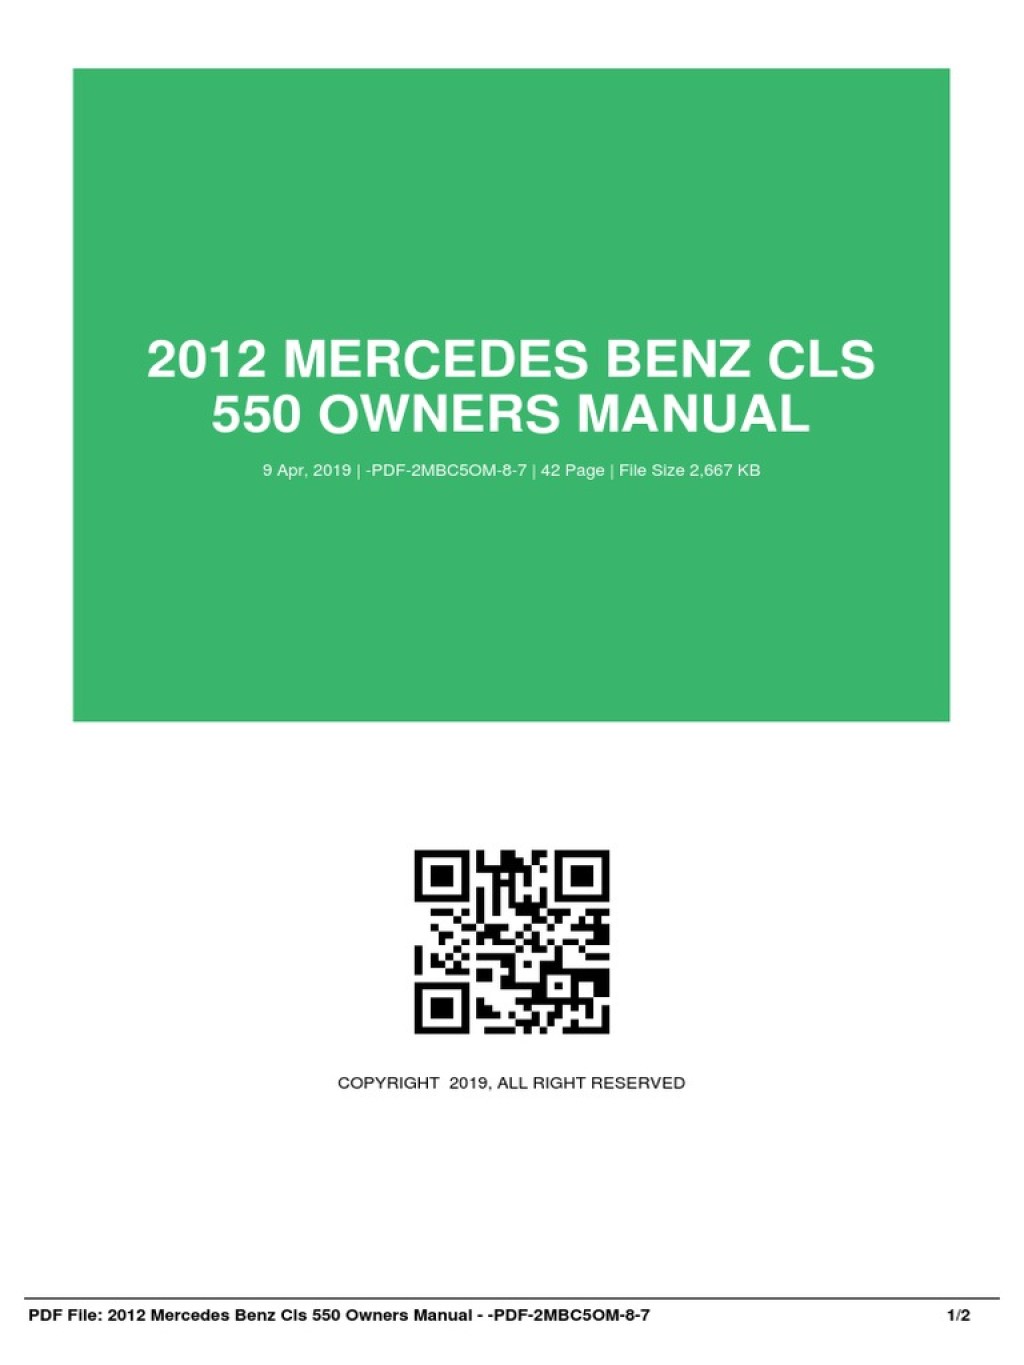 Picture of: IDfbedc- Mercedes Benz Cls  Owners Manual  PDF